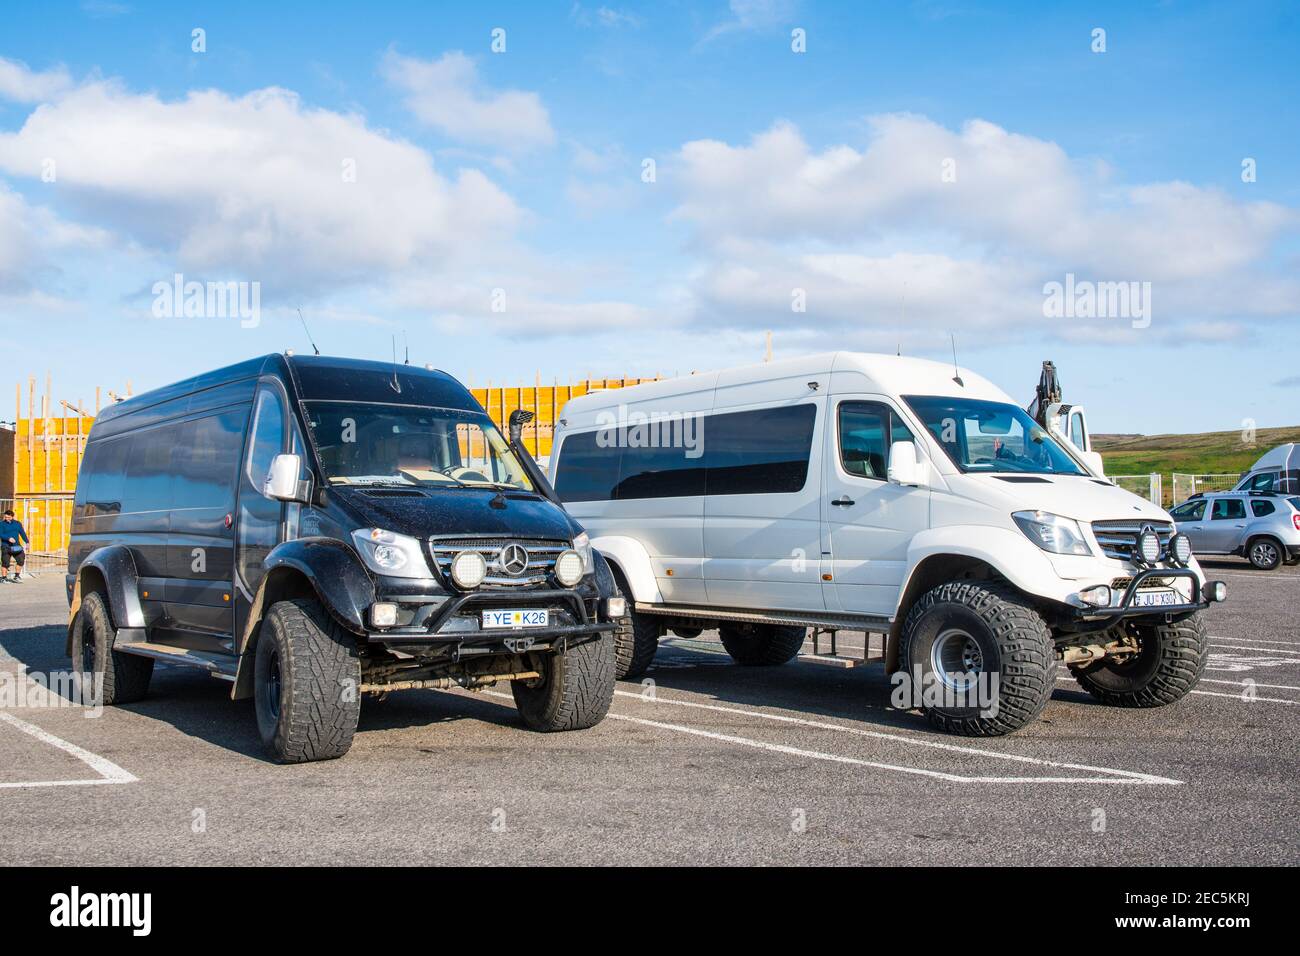 Gullfoss Iceland - August 10. 2019: Modified 4x4 mercedes Benz Sprinter minibuses at the parking lot Stock Photo